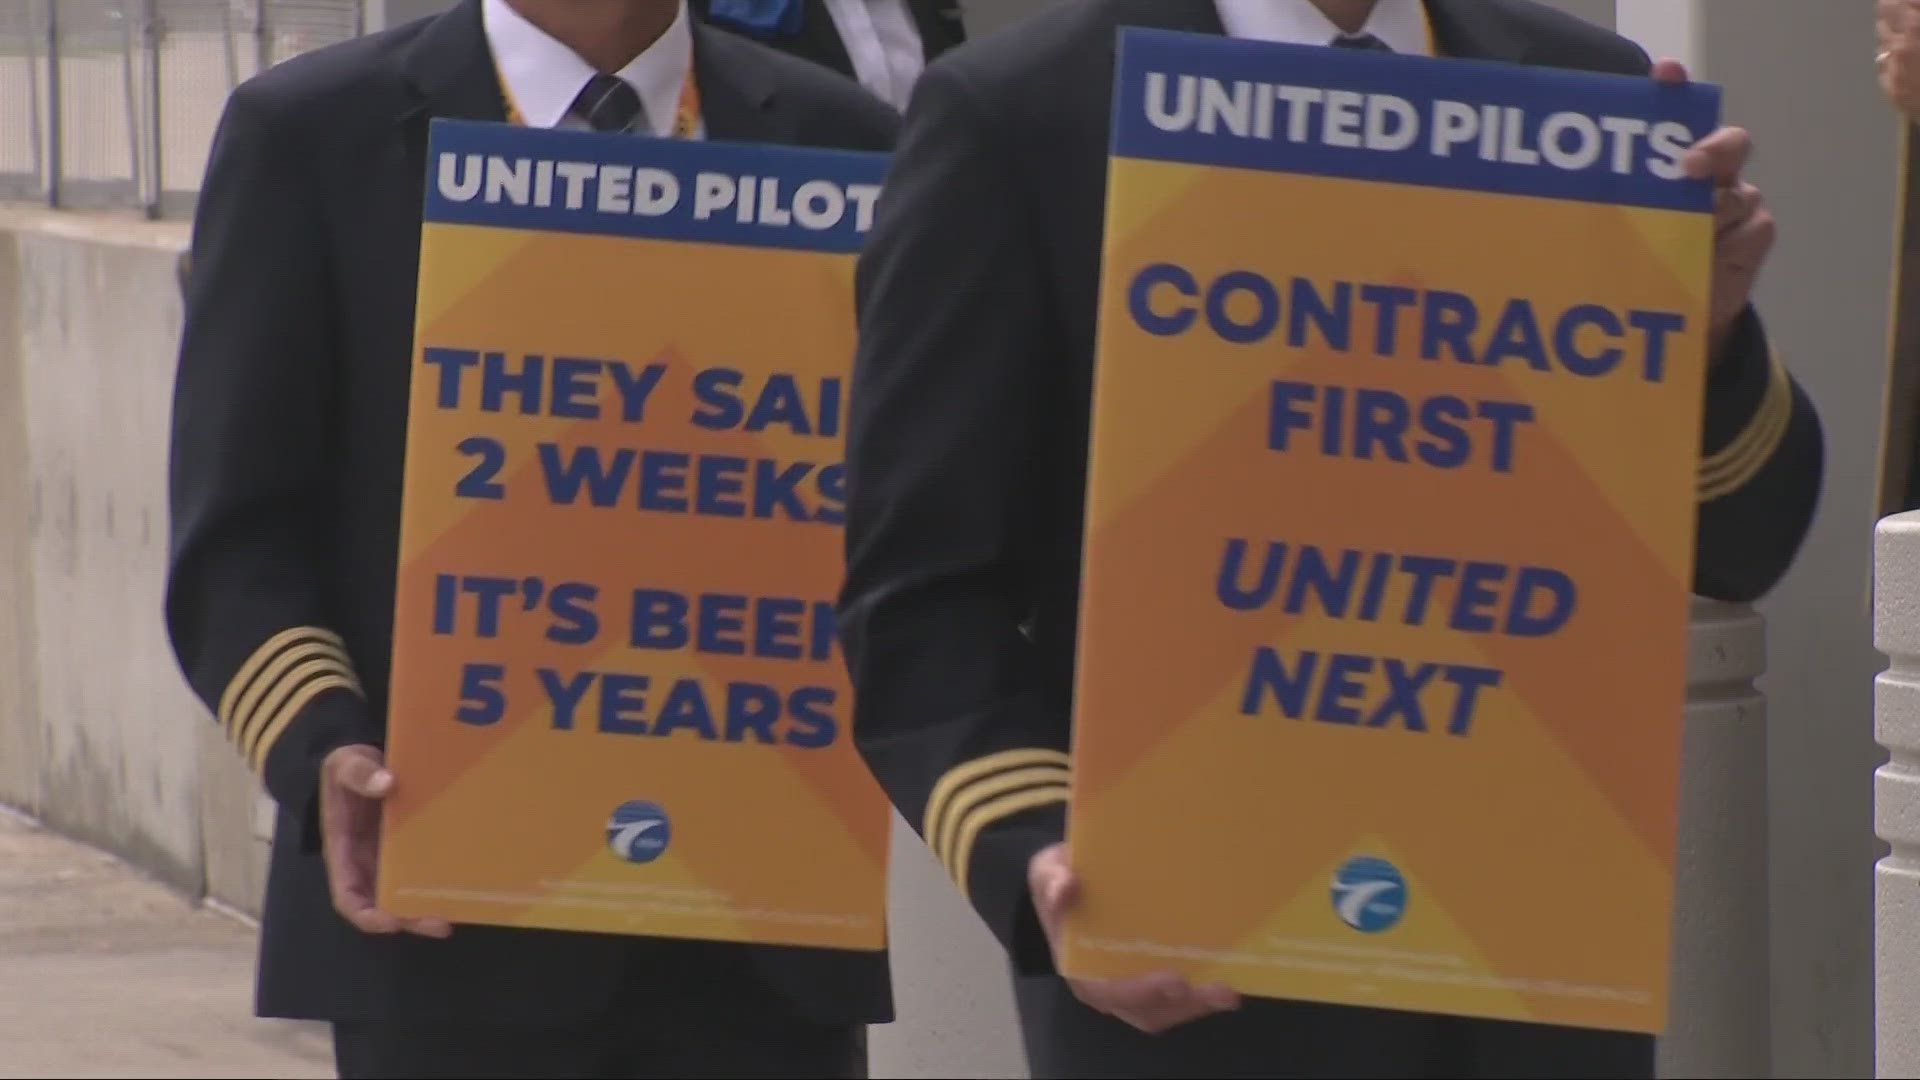 The picket at Hopkins was one of 10 scheduled at airports across the nation on Friday.